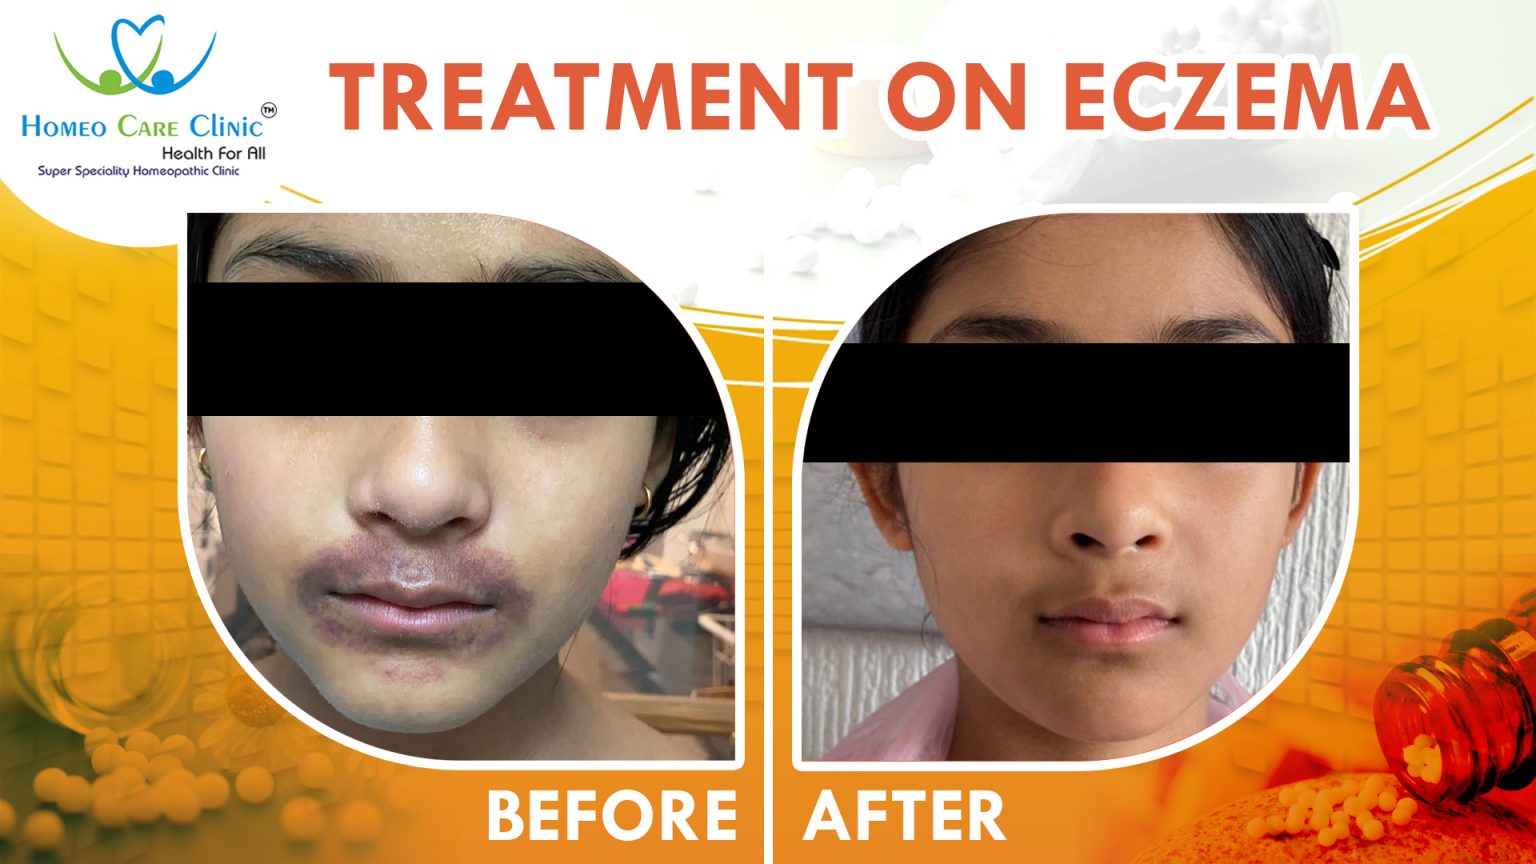 Recovers From Recurring Eczema by Homeopathy